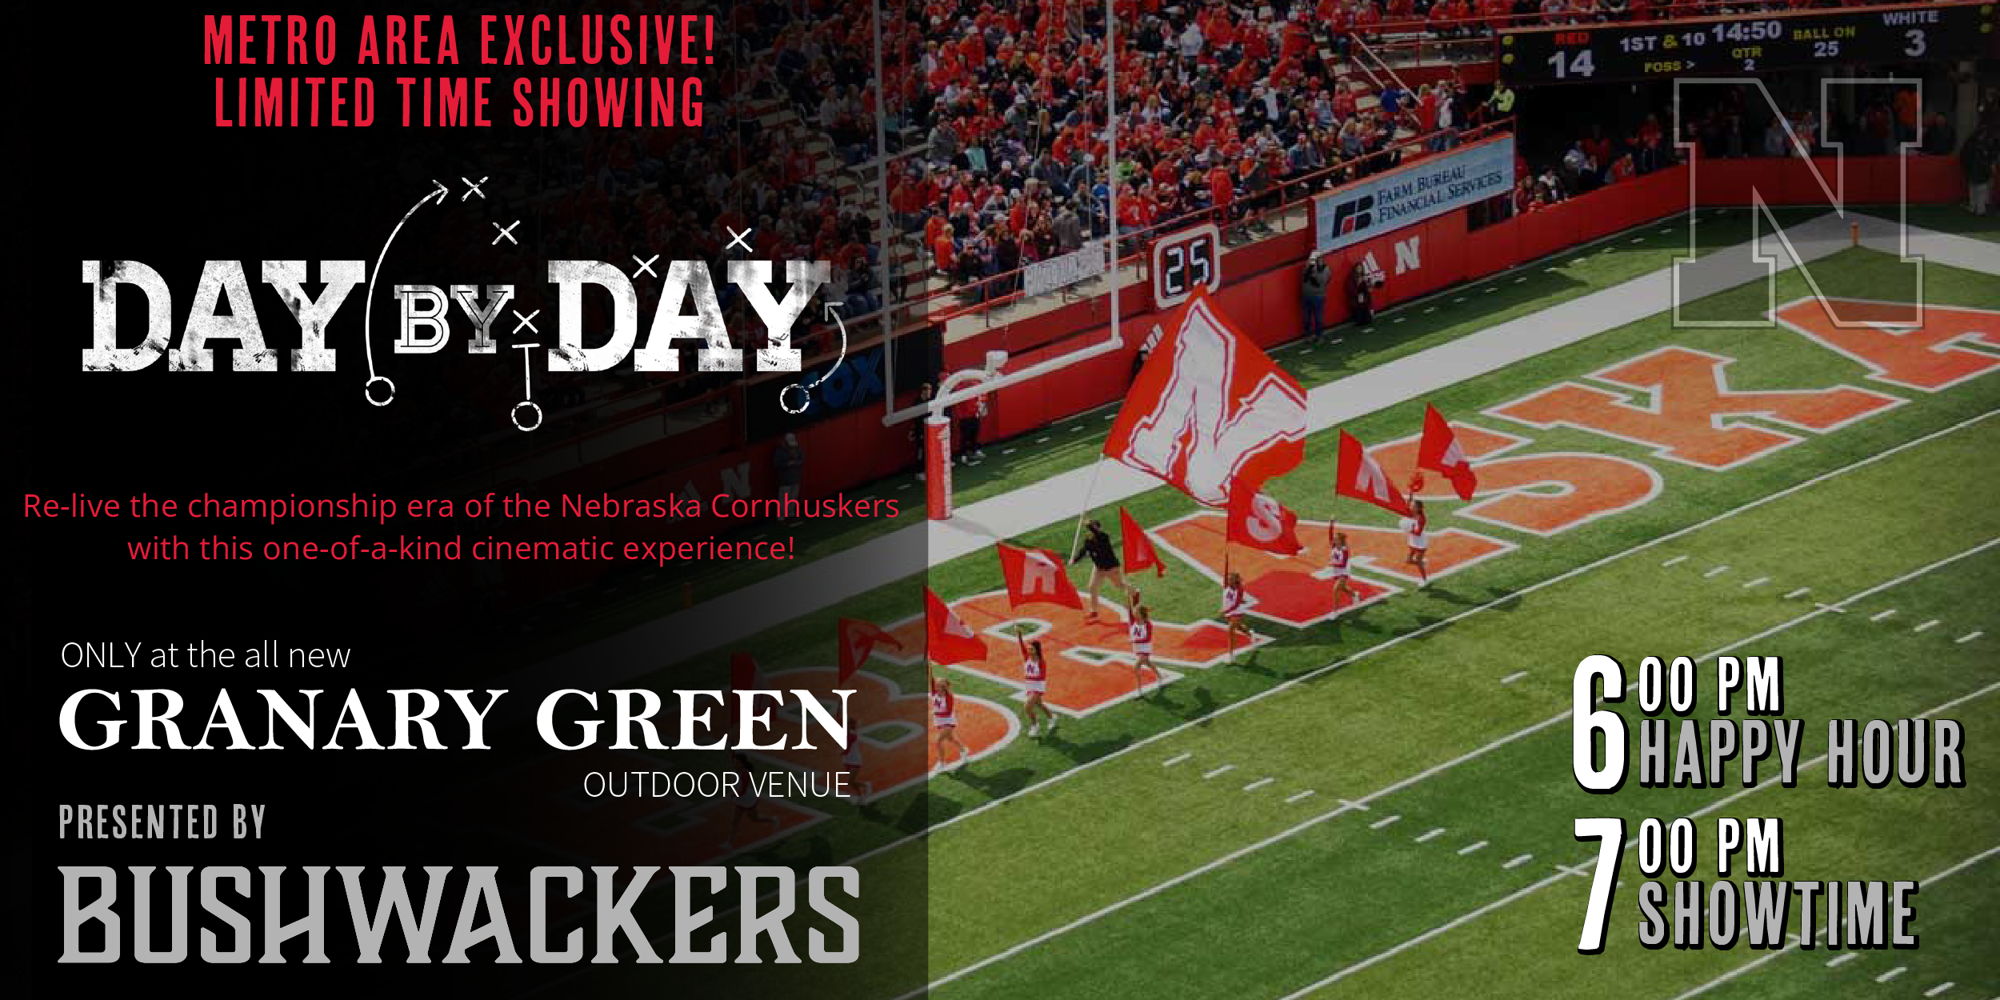 Week 8 of 8: Friday Night Football Film - Showing of "Day by Day" Husker Documentary (Part 1) promotional image